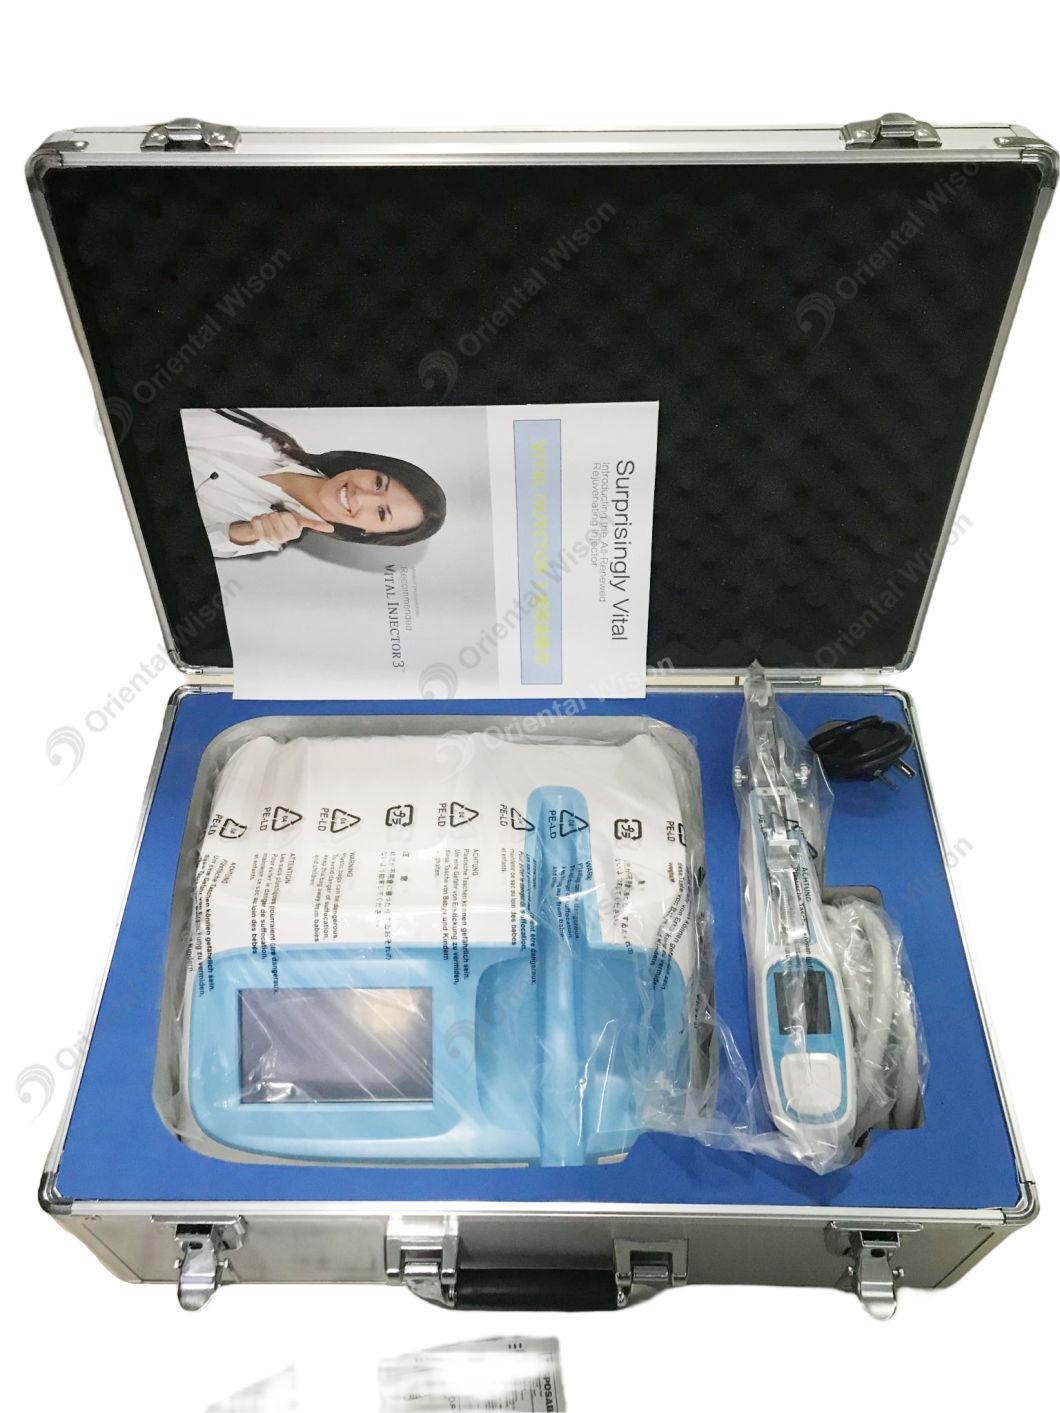 Vital Injector 2 Filler Serum Injection Vital Injector Korea Cosmetic Meso Injector Mesotherapy Gun for Platelet Rich Plasma Prp Injection Meso Gun